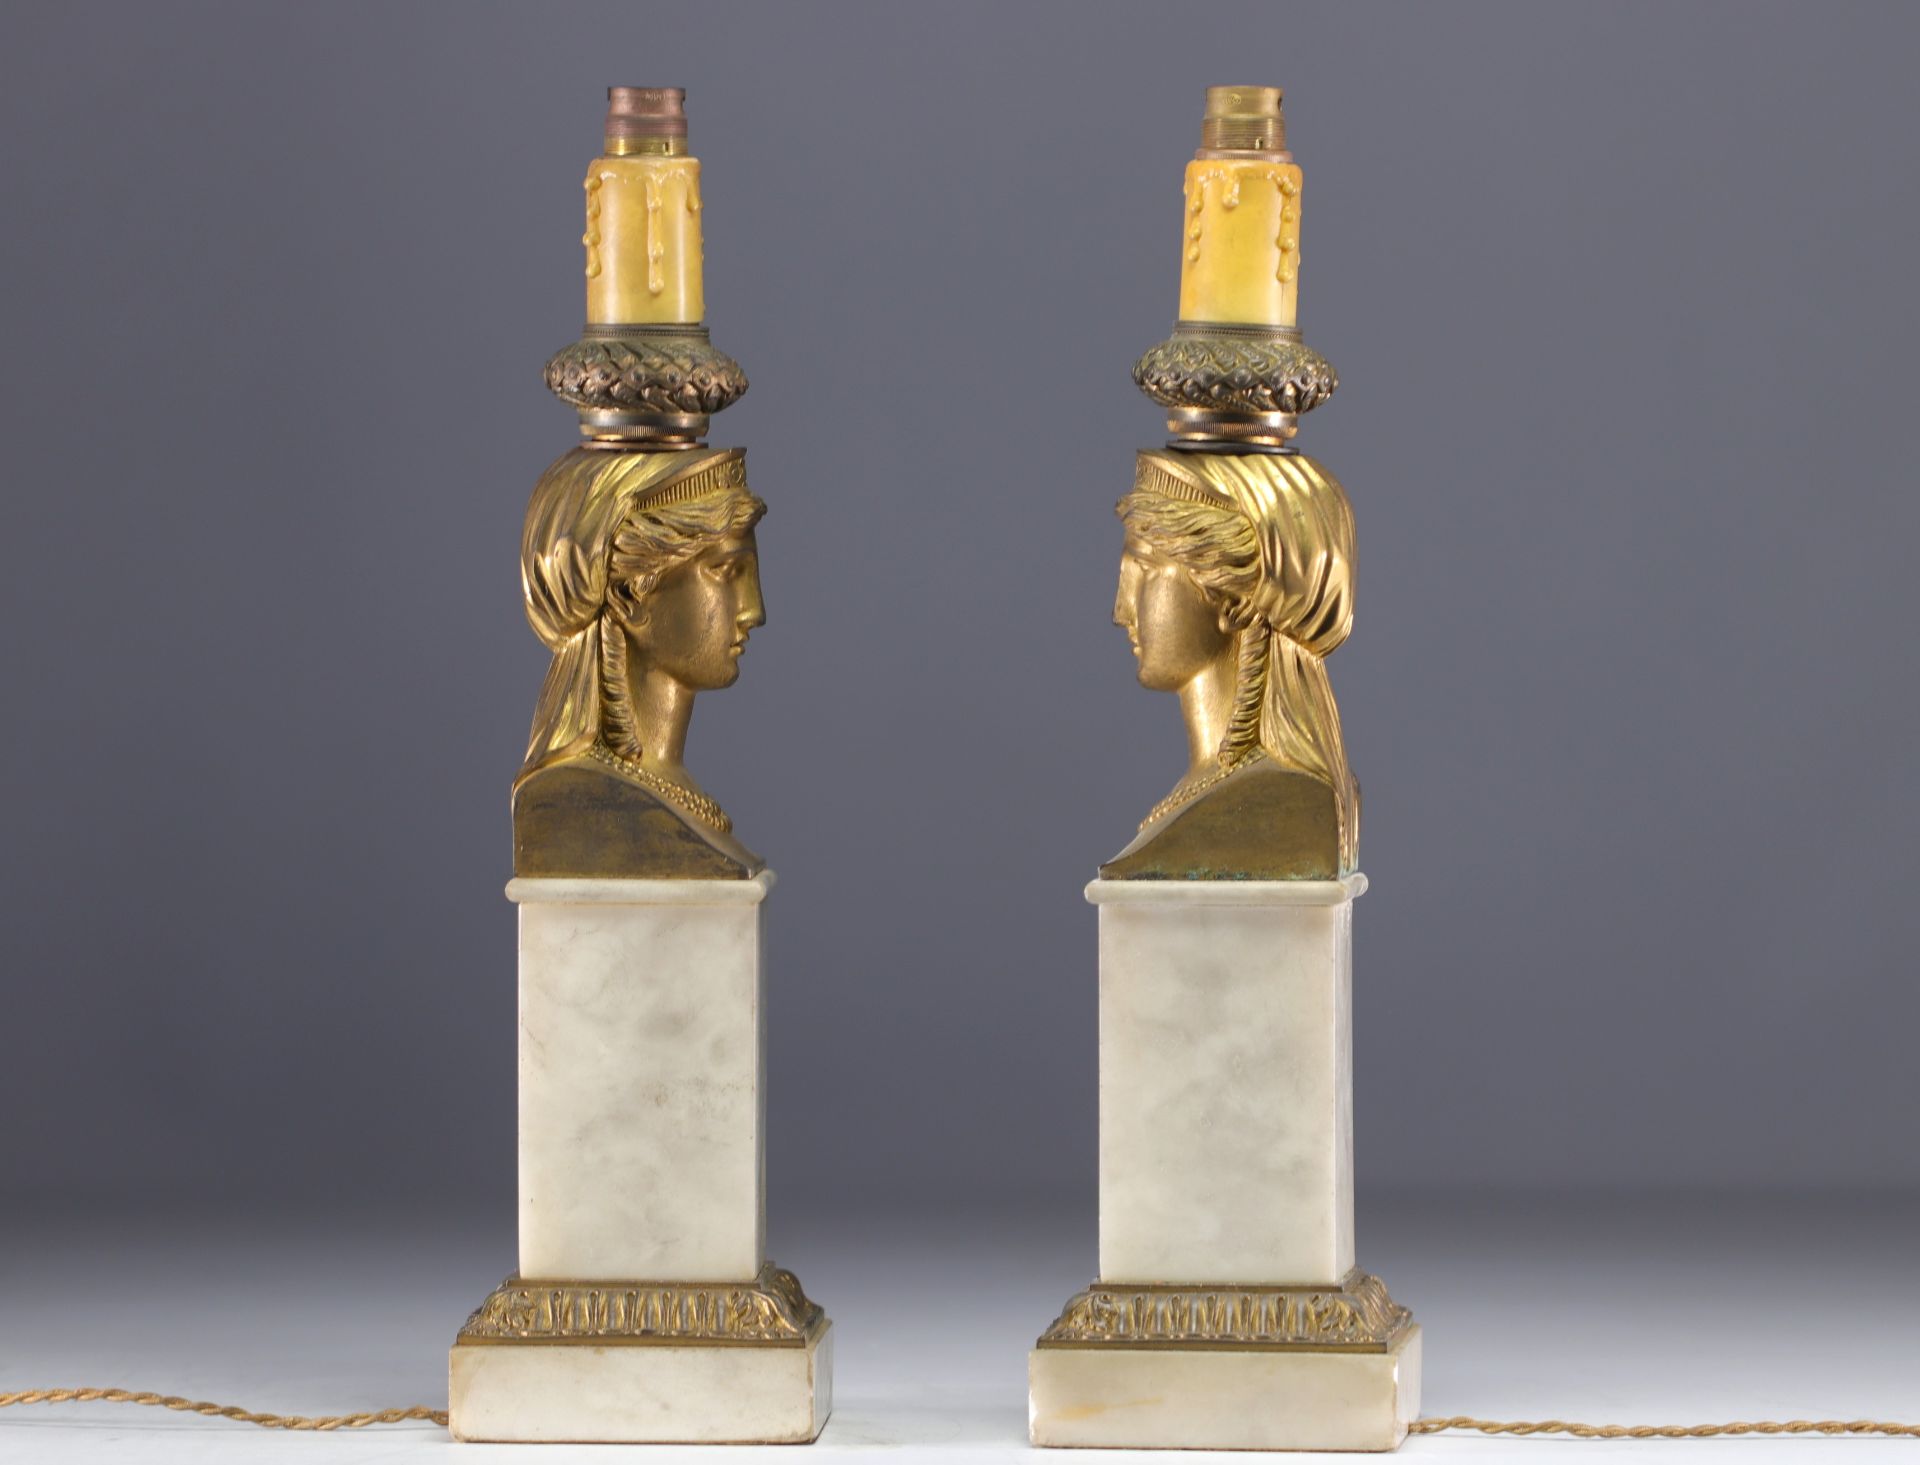 Pair of white marble and gilt bronze lamps with Caryatid faces, Empire period. - Bild 3 aus 4